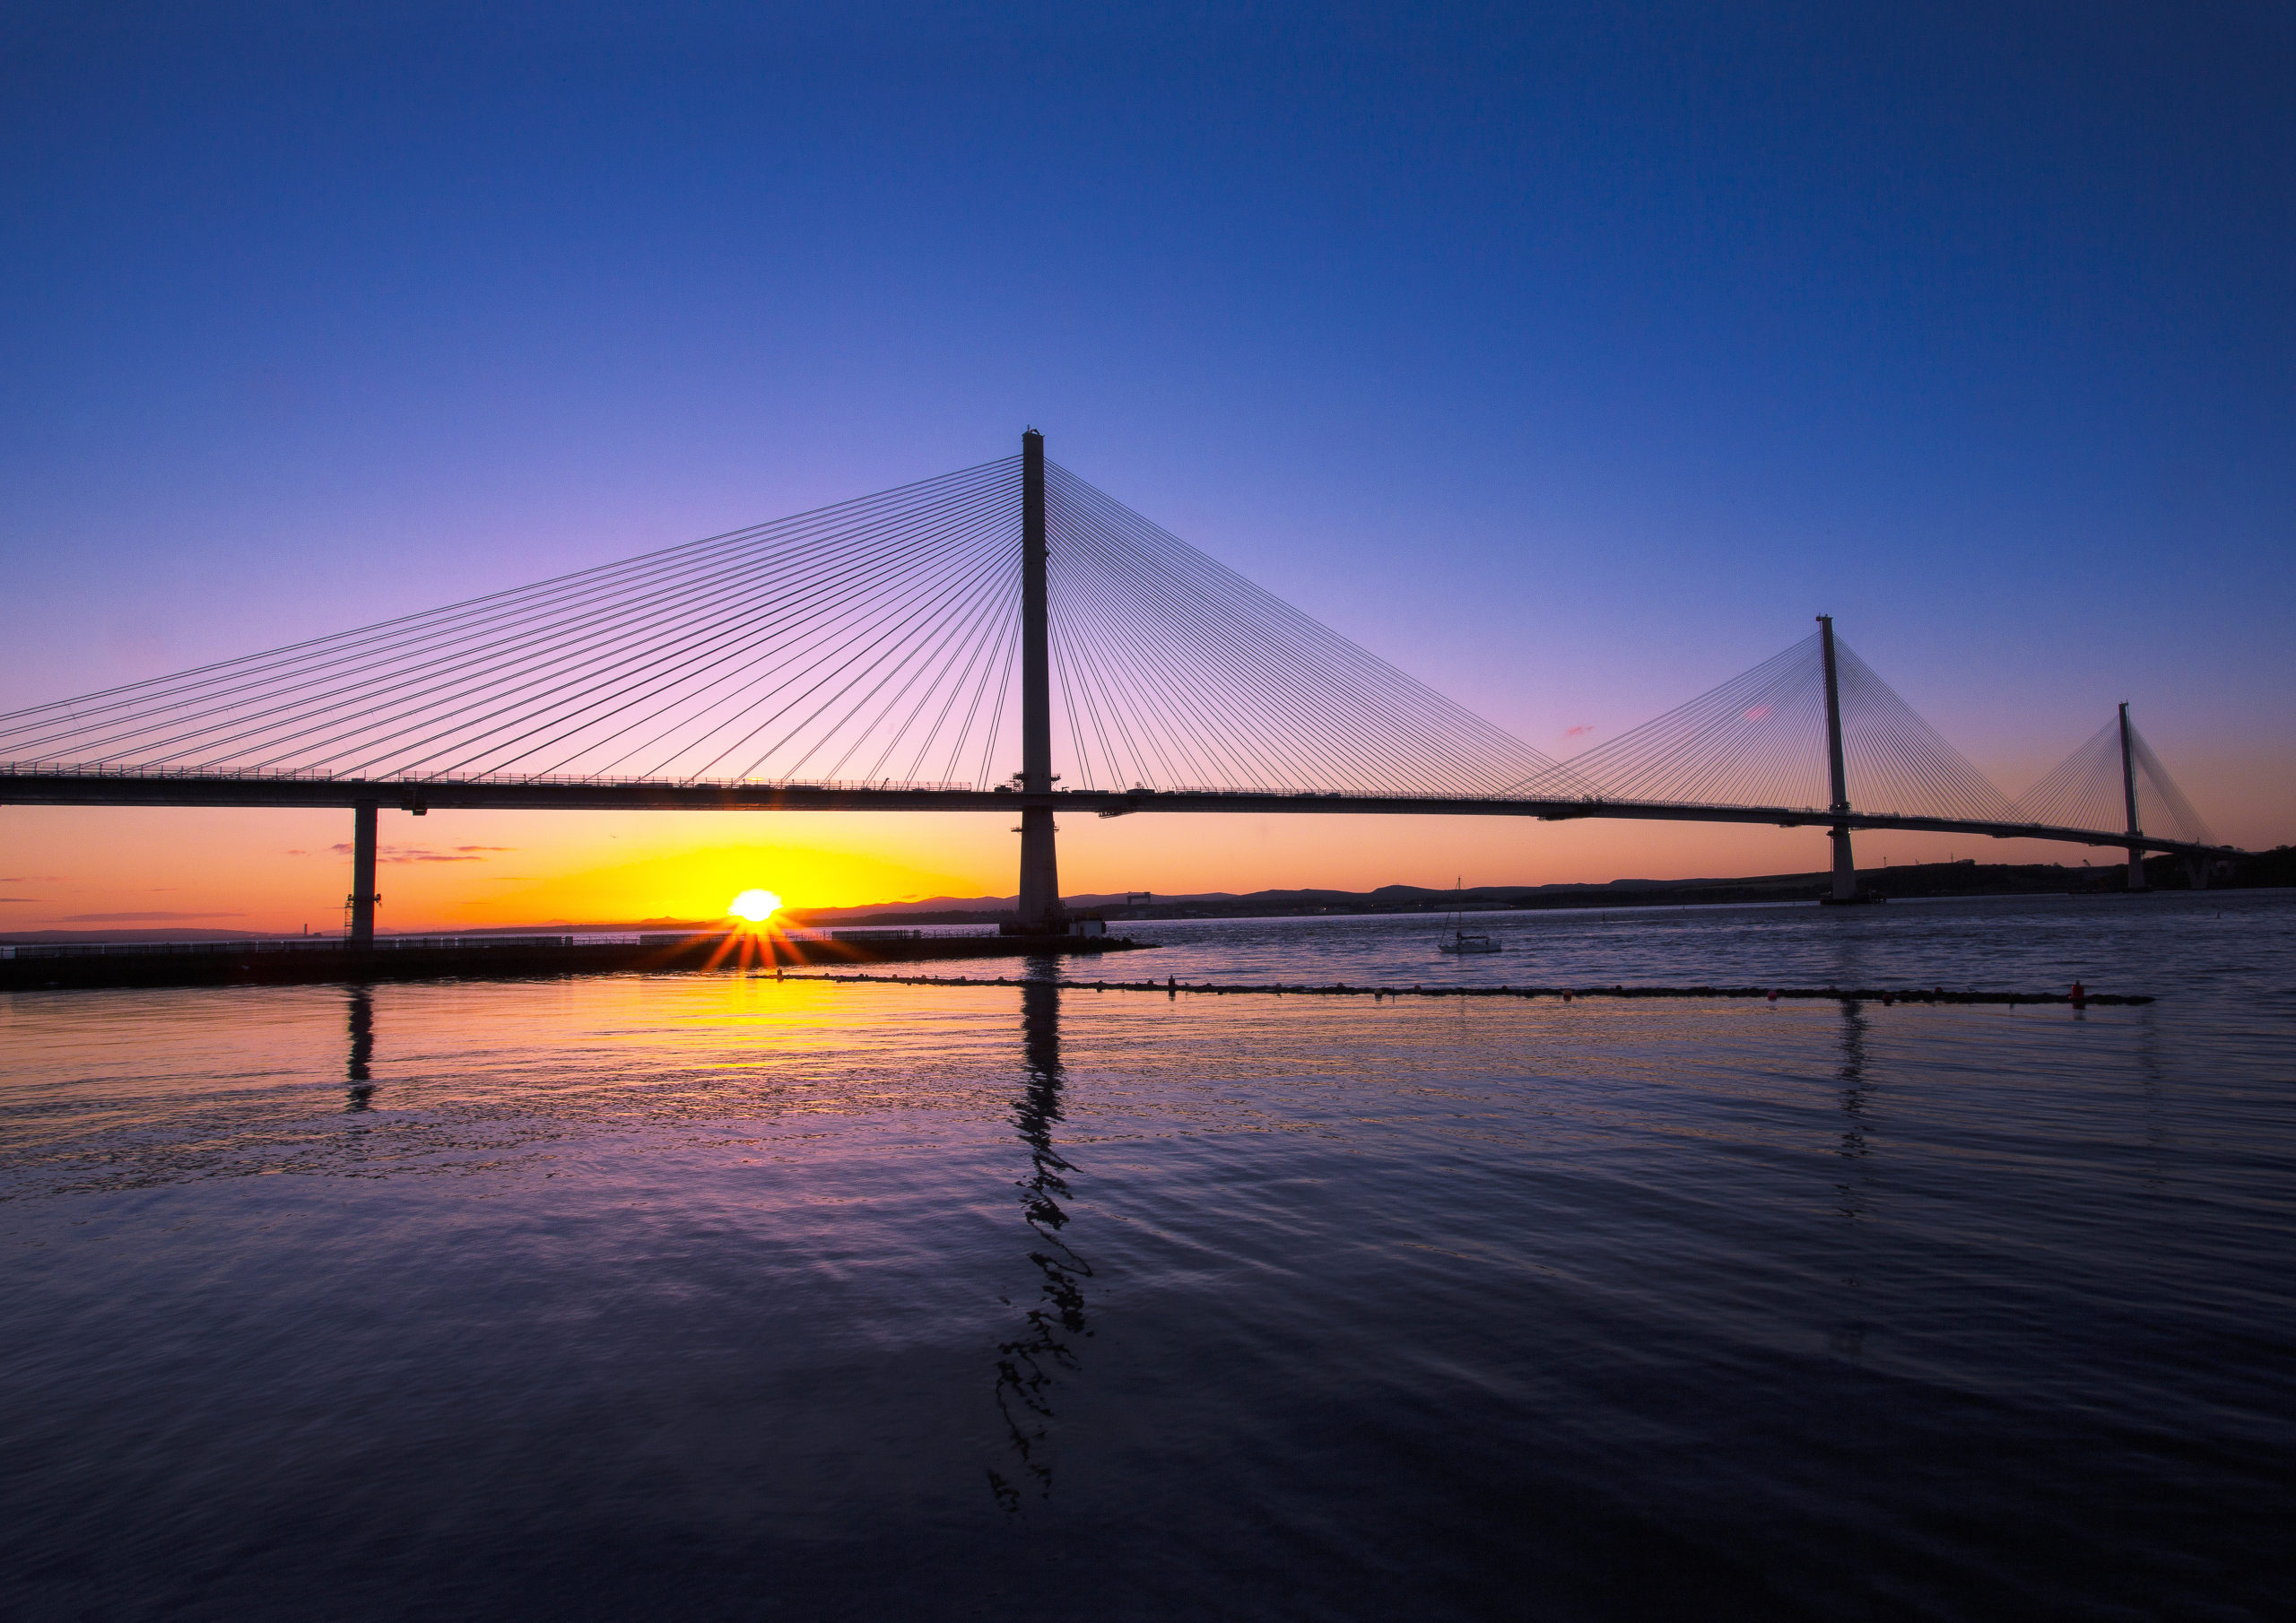 Queens Ferry during sunset case civil and structural engineering project queensferry crossing